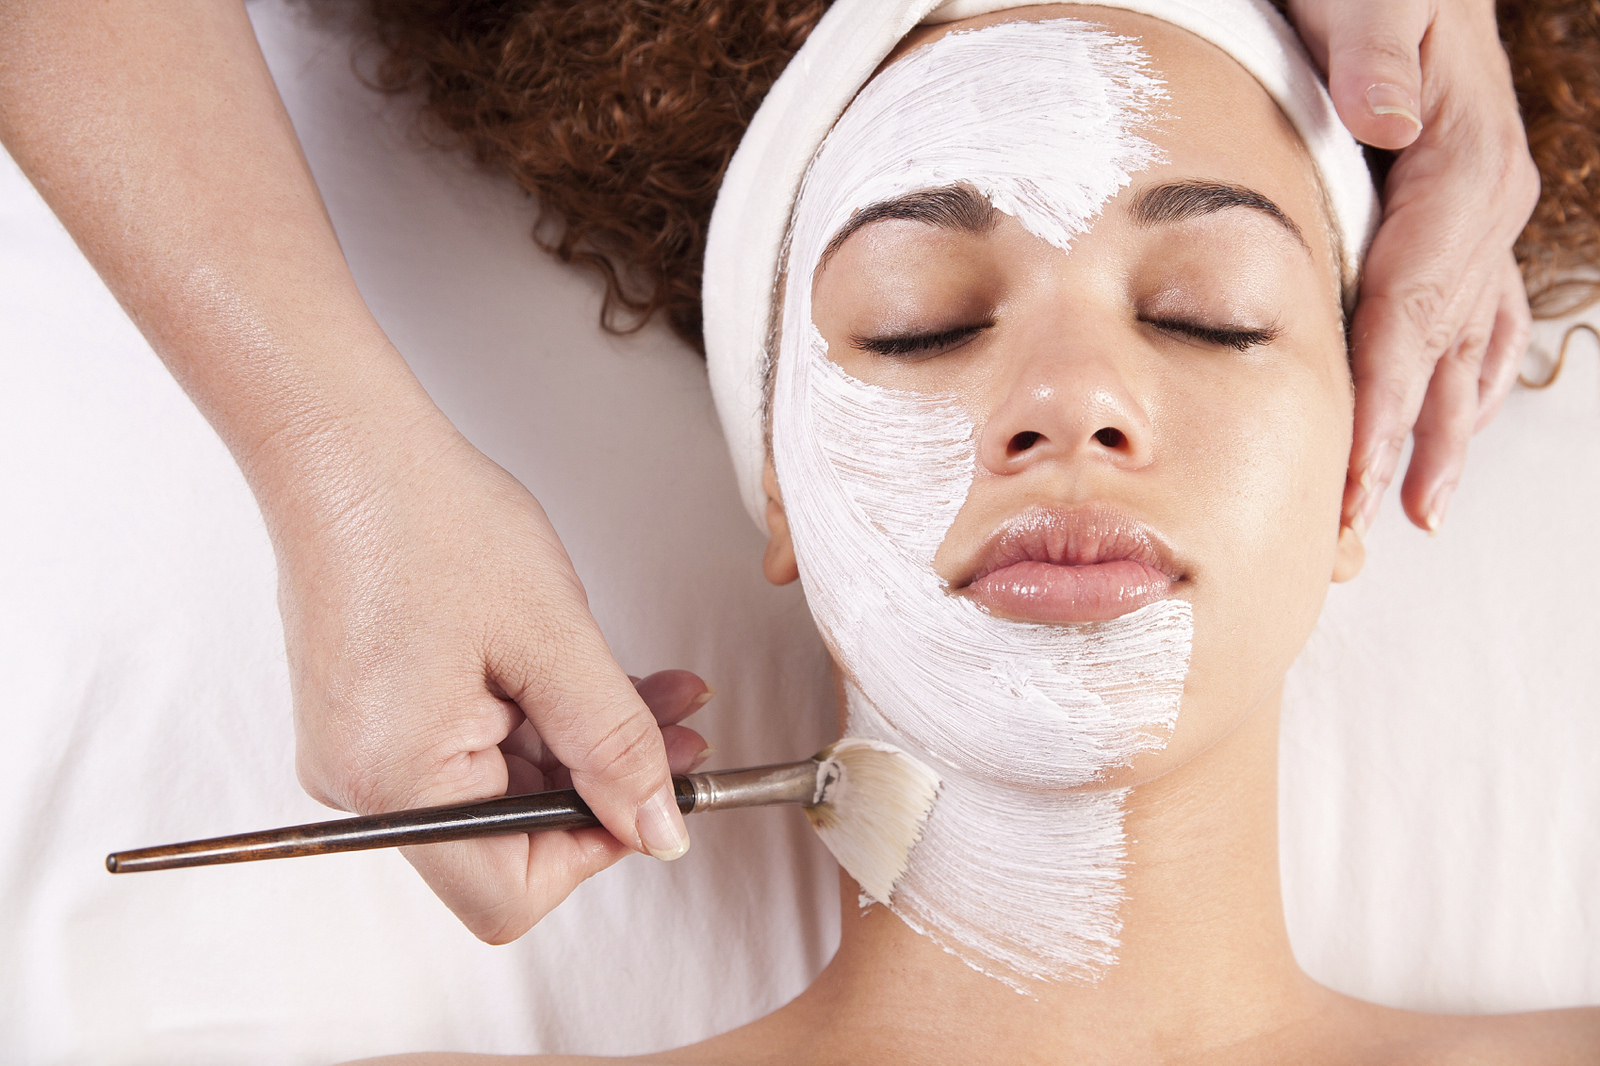 Wondering why you should visit a professional to do your facial? We have the answers inside.